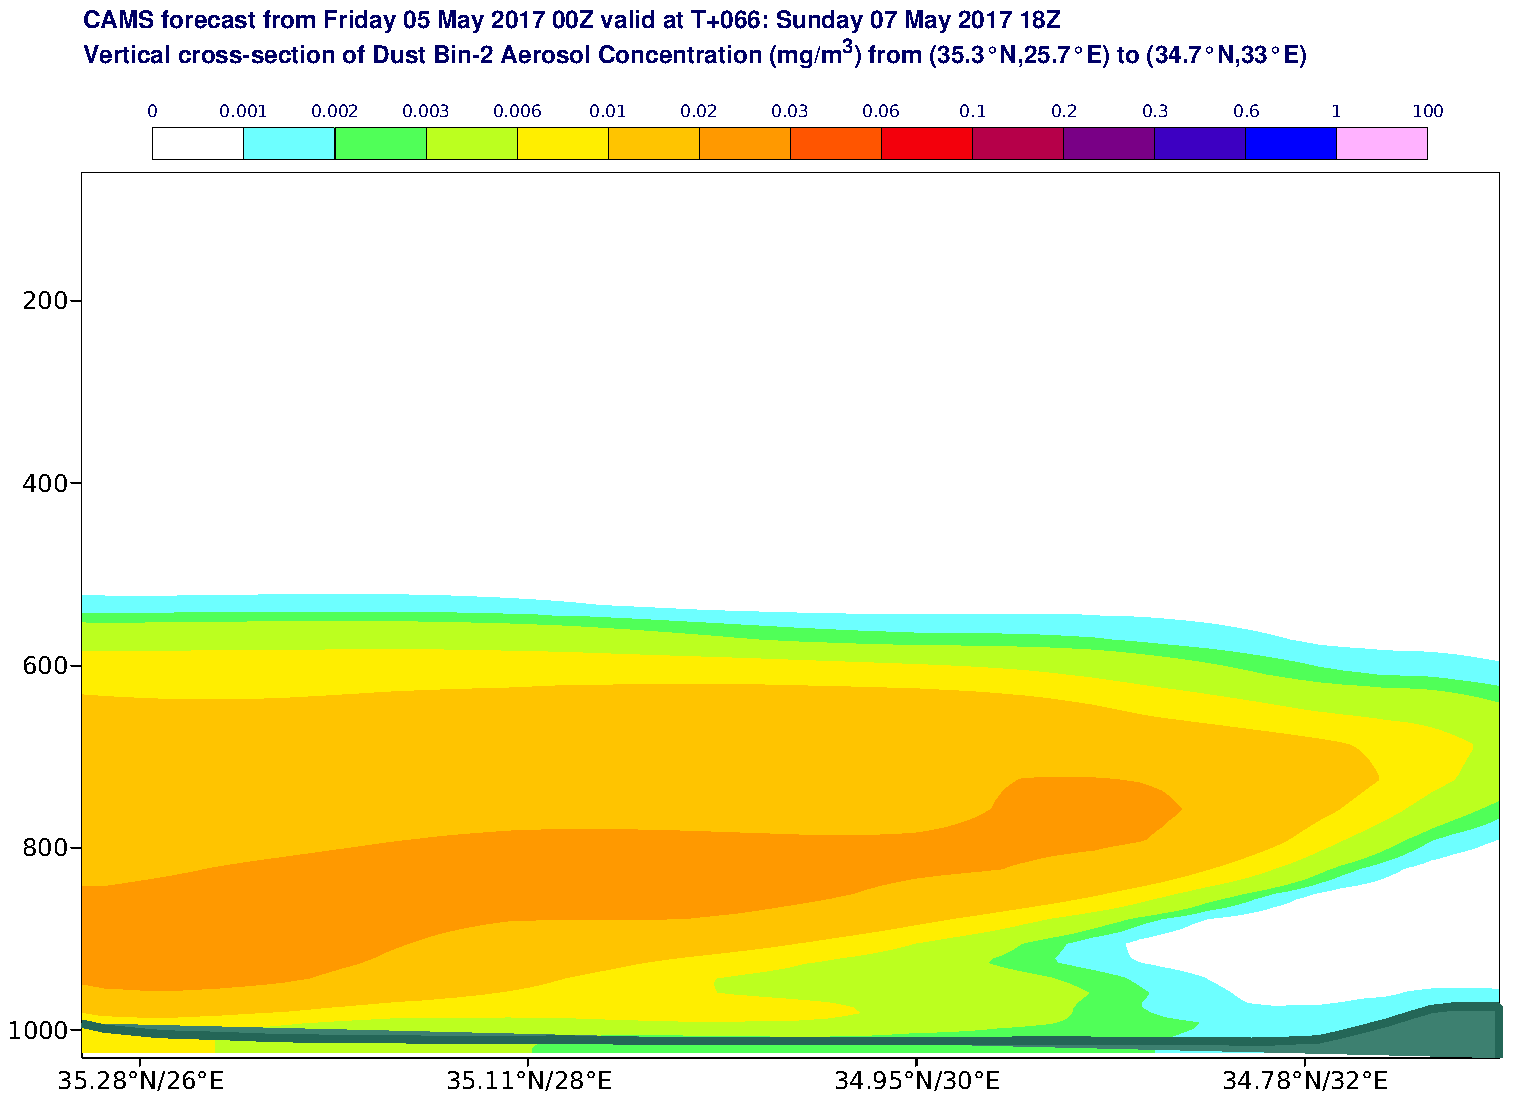 Vertical cross-section of Dust Bin-2 Aerosol Concentration (mg/m3) valid at T66 - 2017-05-07 18:00